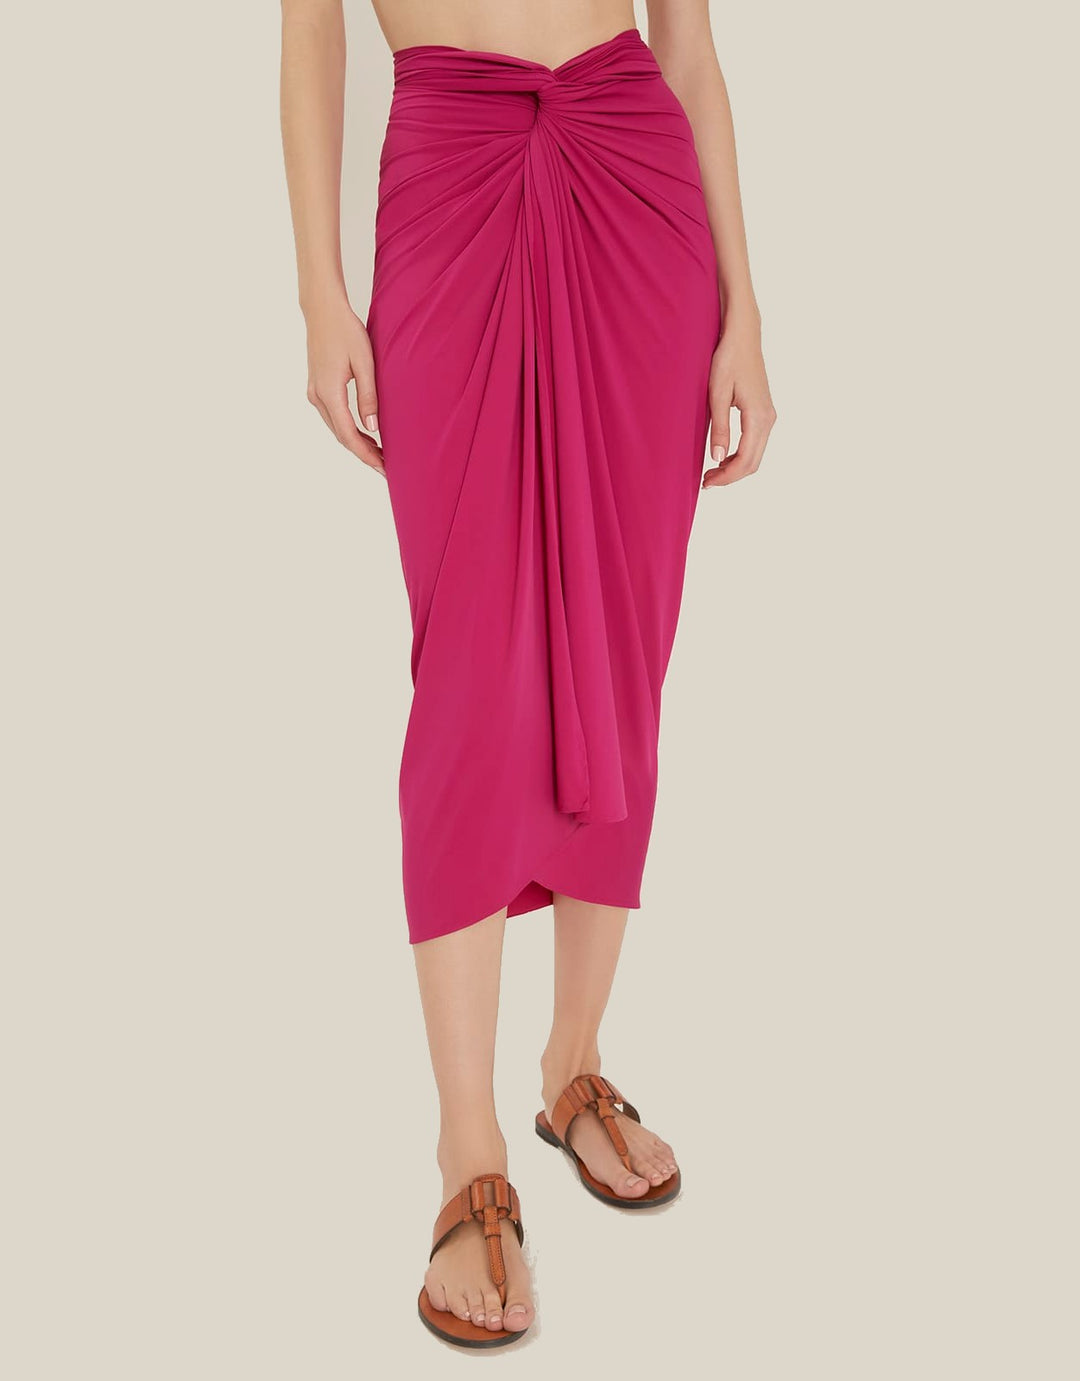 Lenny Niemeyer Sarong Cover Up Carmine Pink